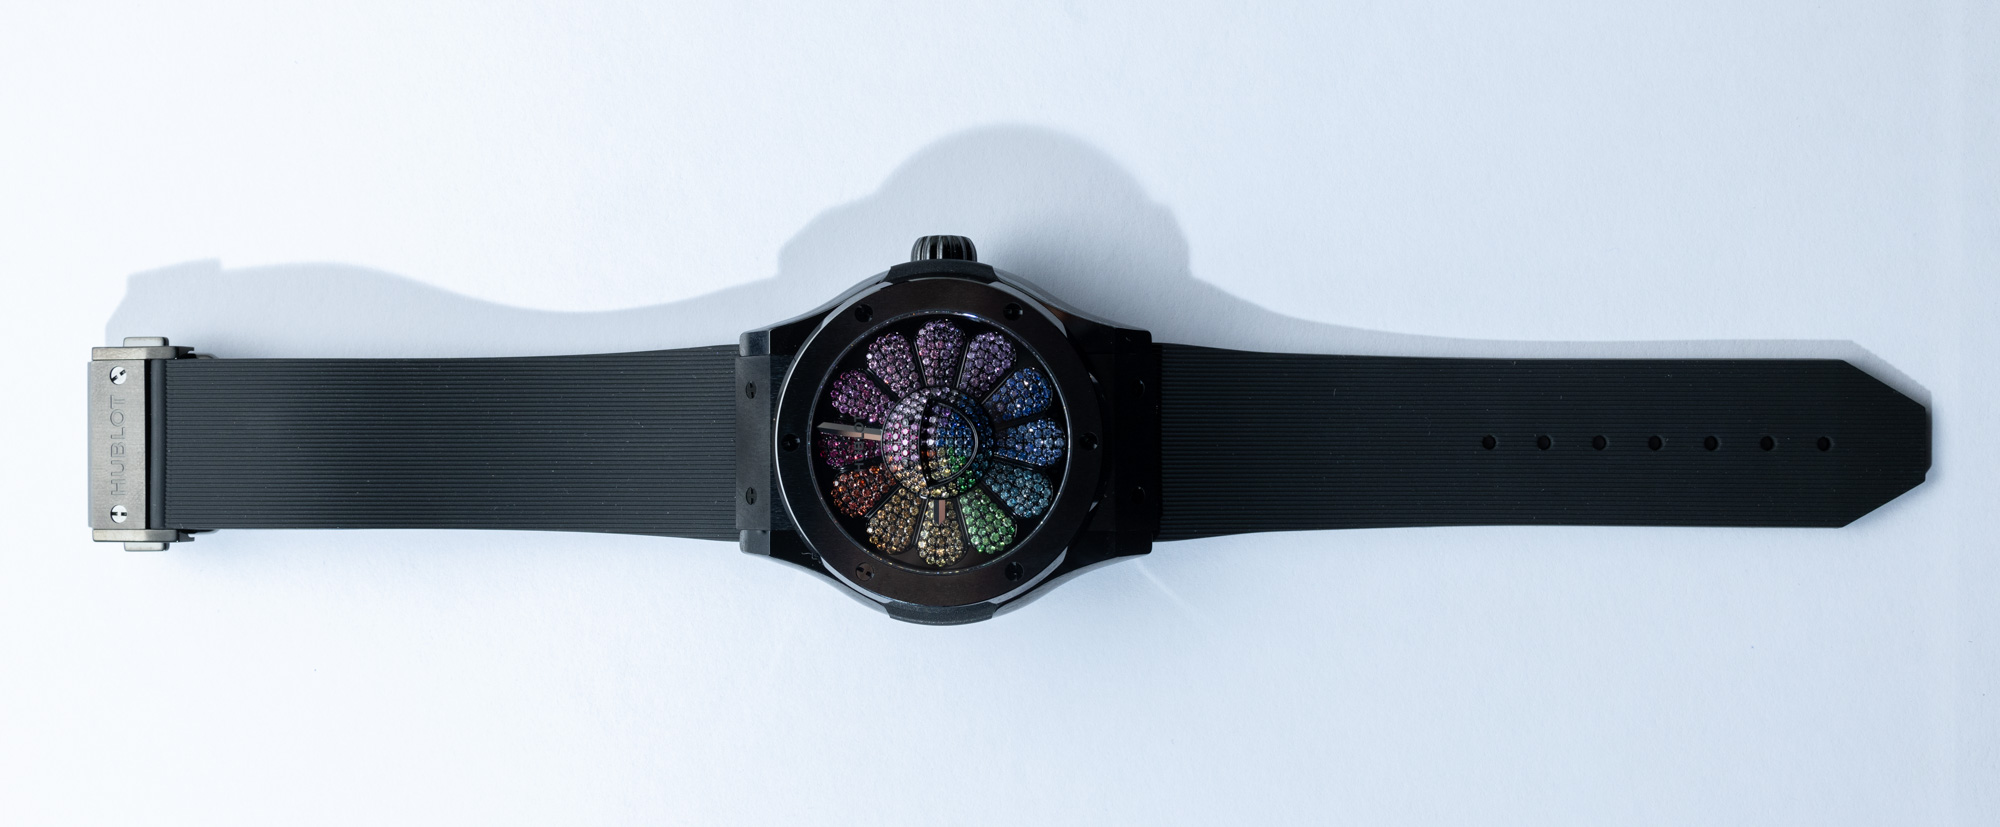 HUBLOT AND TAKASHI MURAKAMI LAUNCH A COLLECTION OF 13 UNIQUE WATCHES AND 13  UNIQUE NFTs